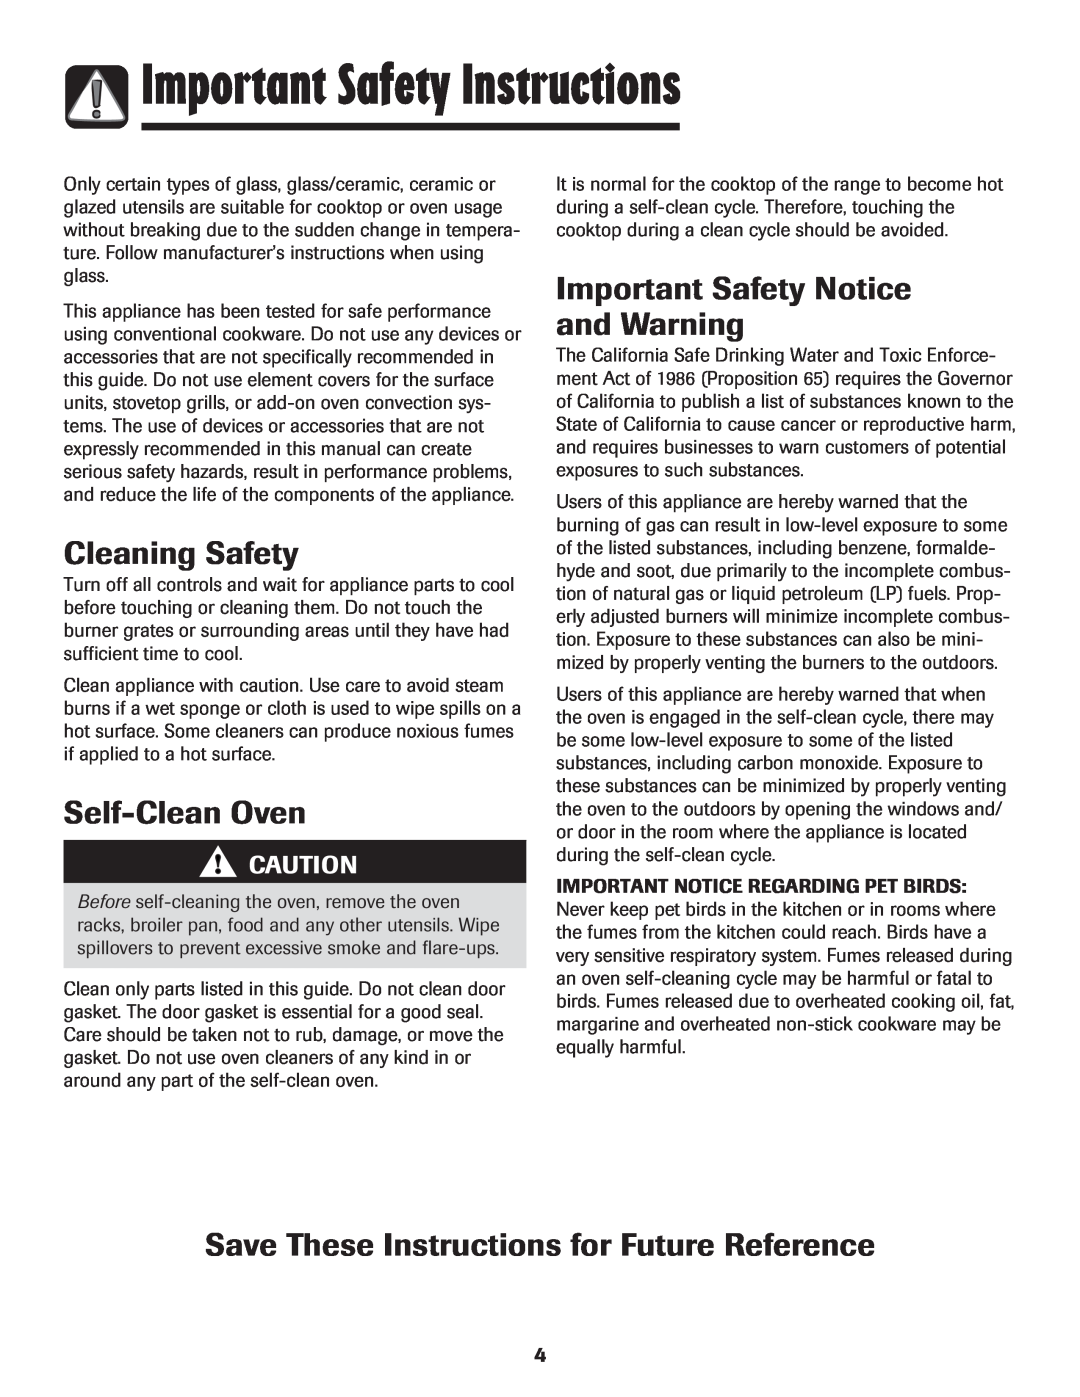 Magic Chef 500 Cleaning Safety, Self-CleanOven, Important Safety Notice and Warning, Important Safety Instructions 